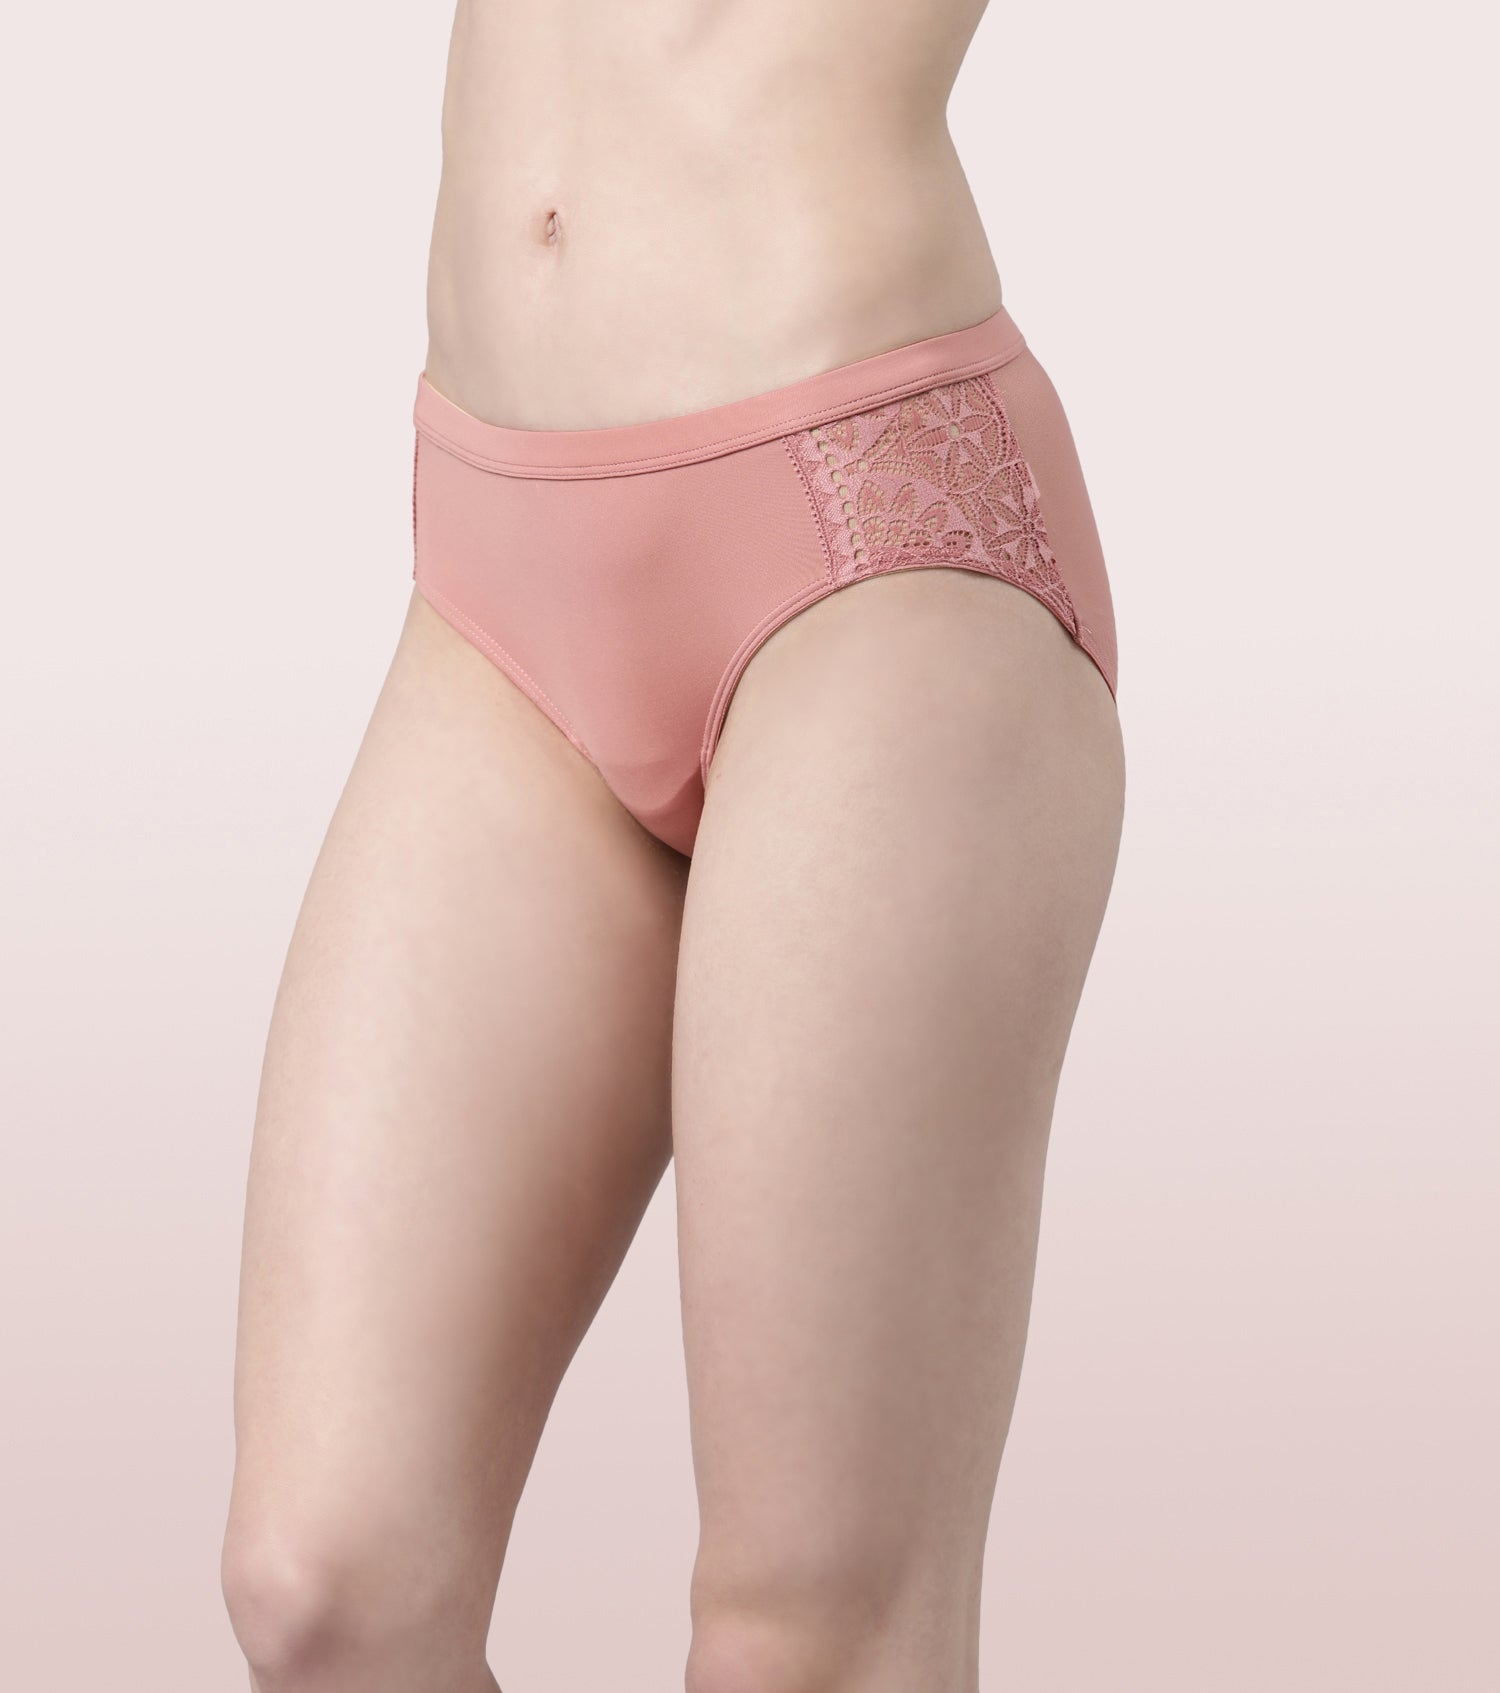 Enamor Mid Waist Hipster Co-Ordinate Panty For Women | Stretch Tulle Fabric  With Pretty Side Lace Detailing | P118 - Dusty Rose / M